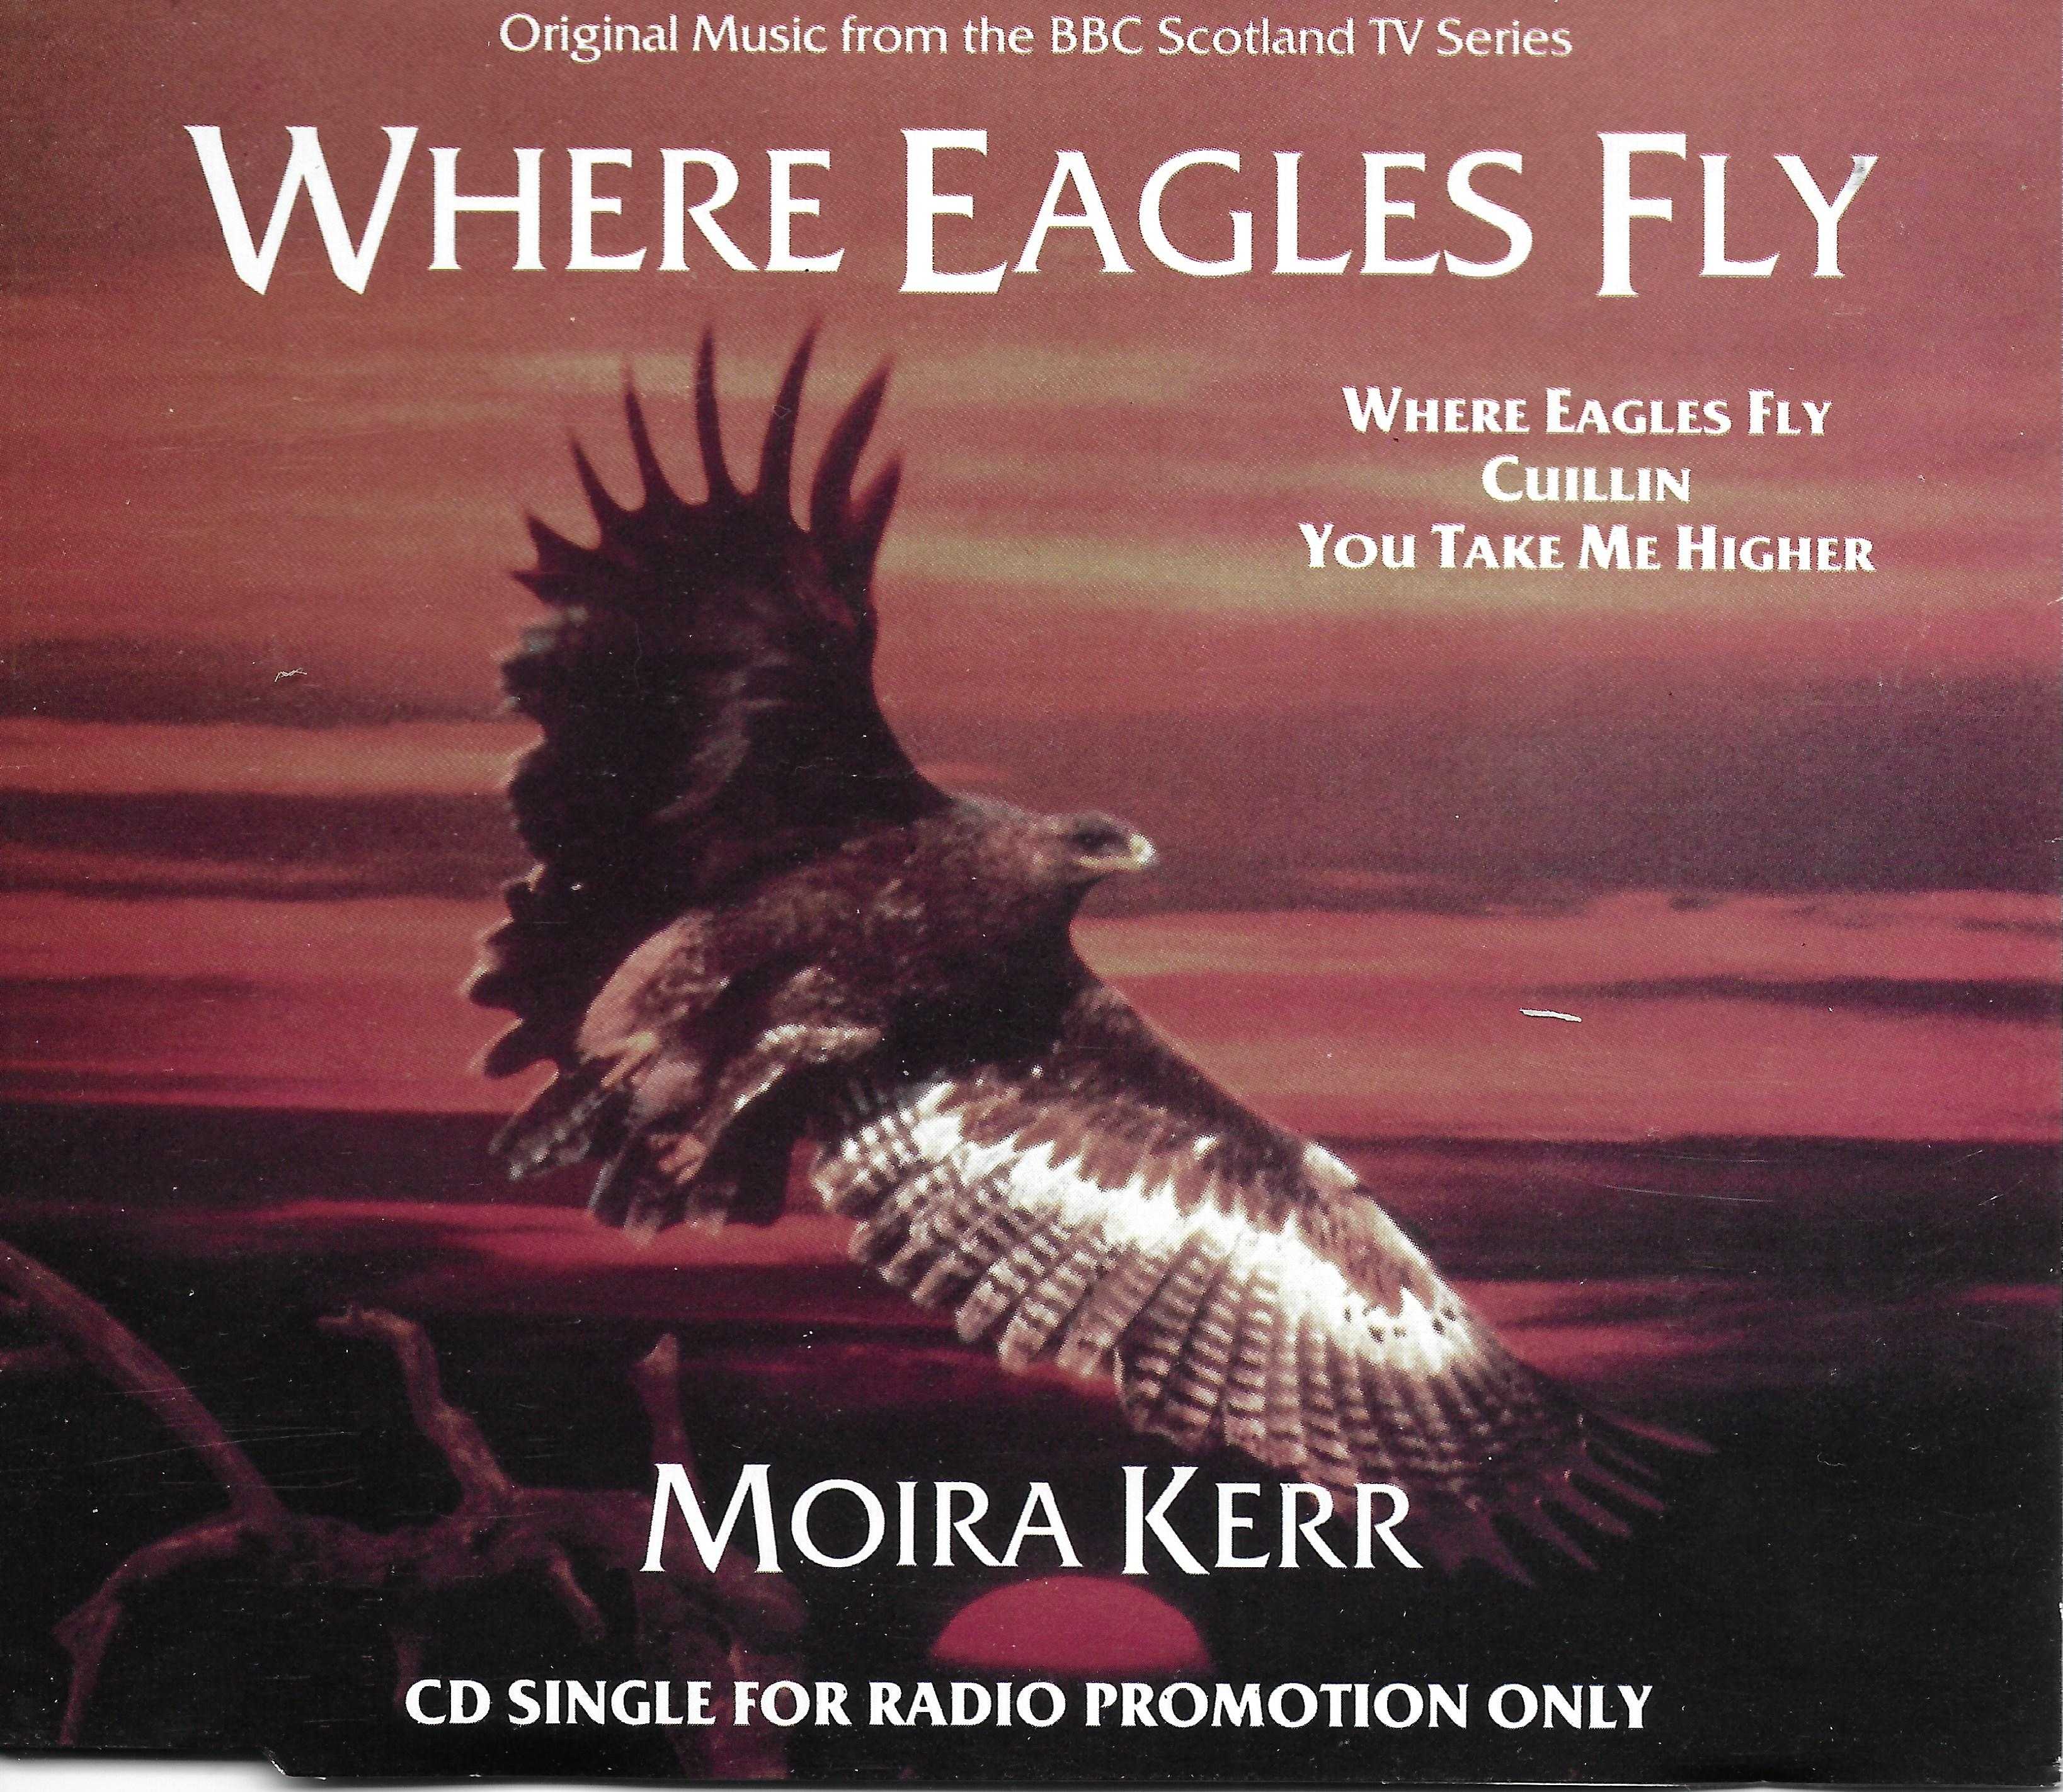 Picture of RAD CD 1 Where eagles fly by artist Moira Kerr